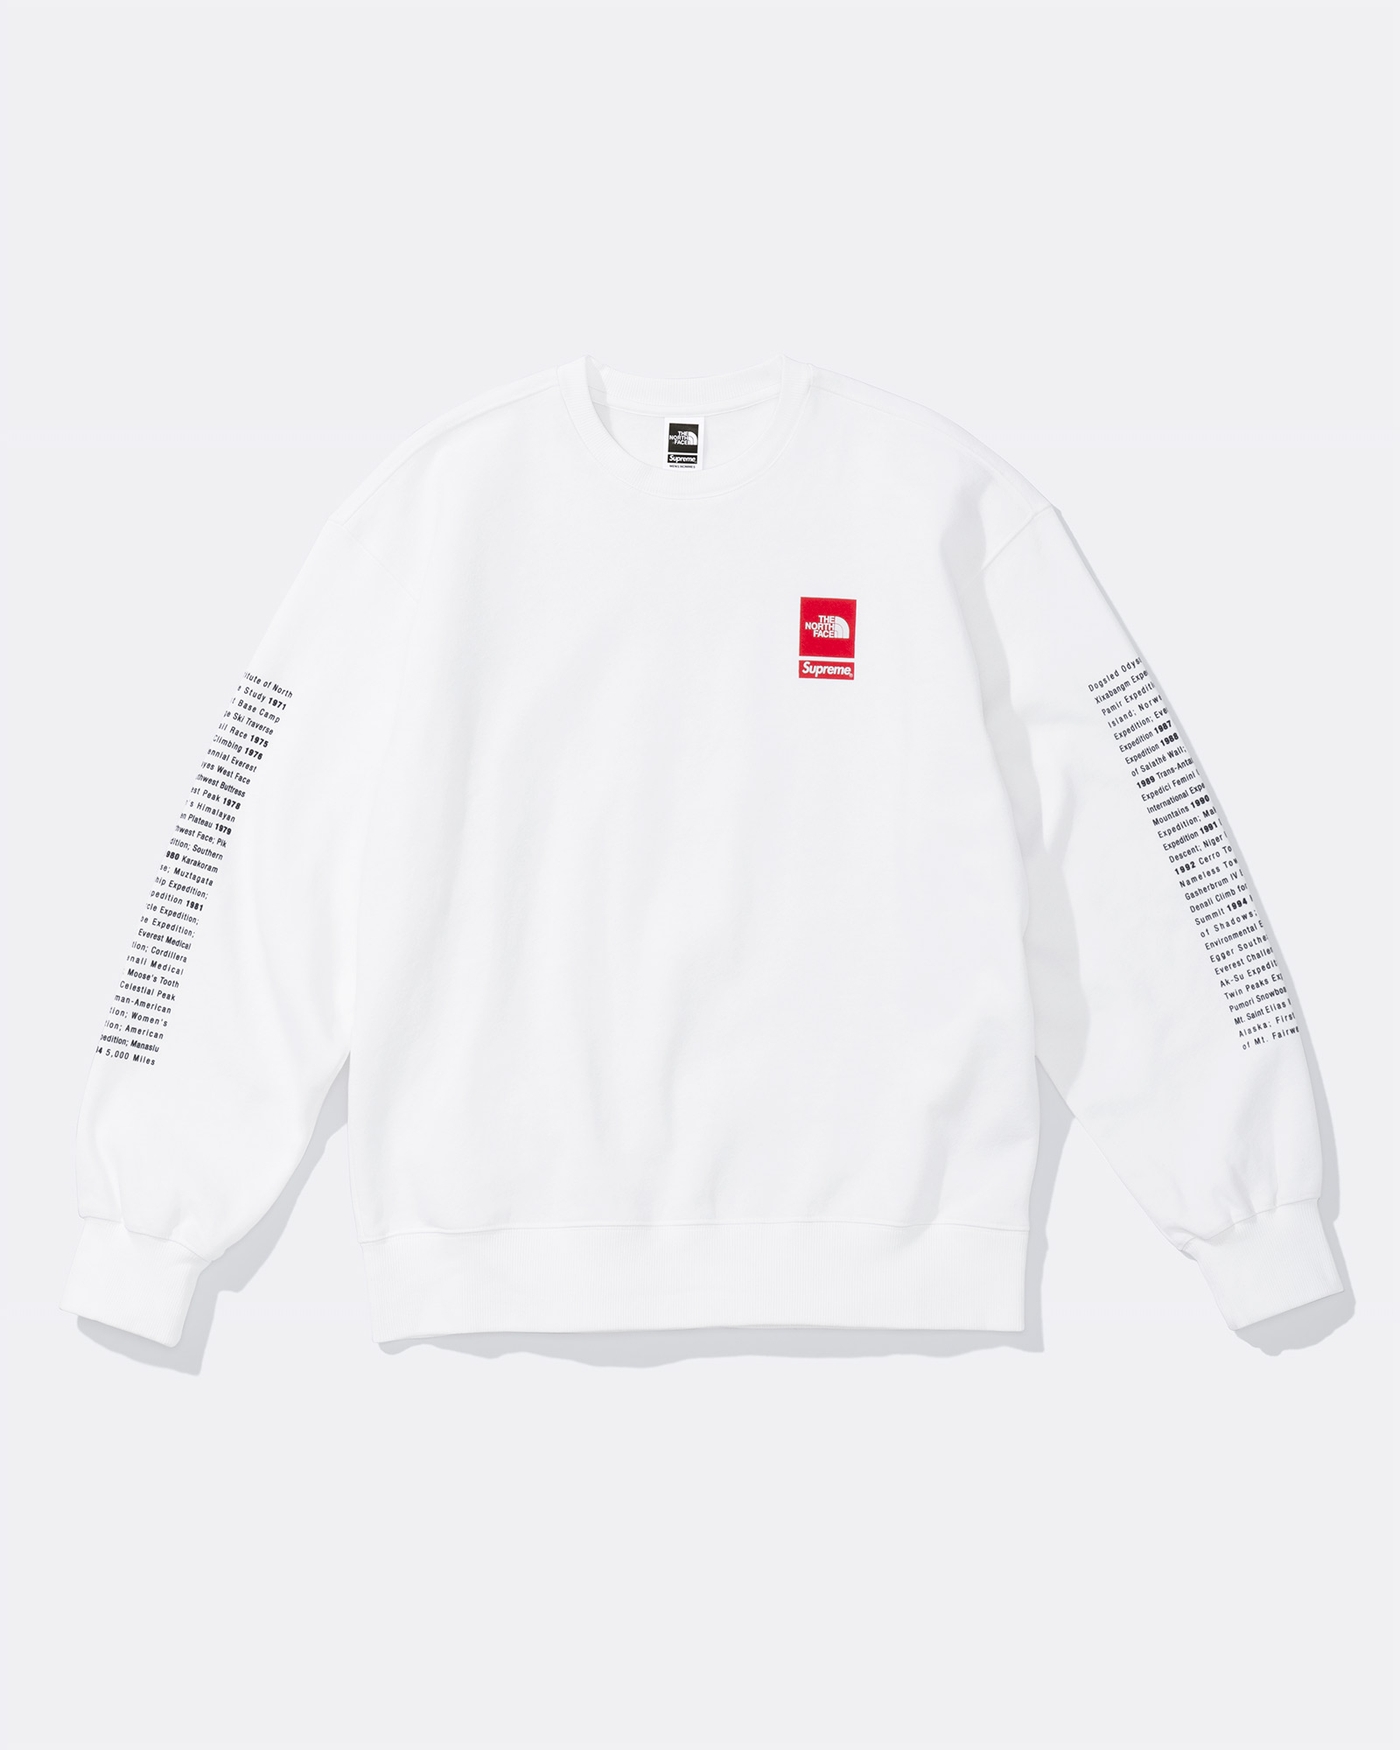 Men's Supreme Long-sleeve t-shirts from £92